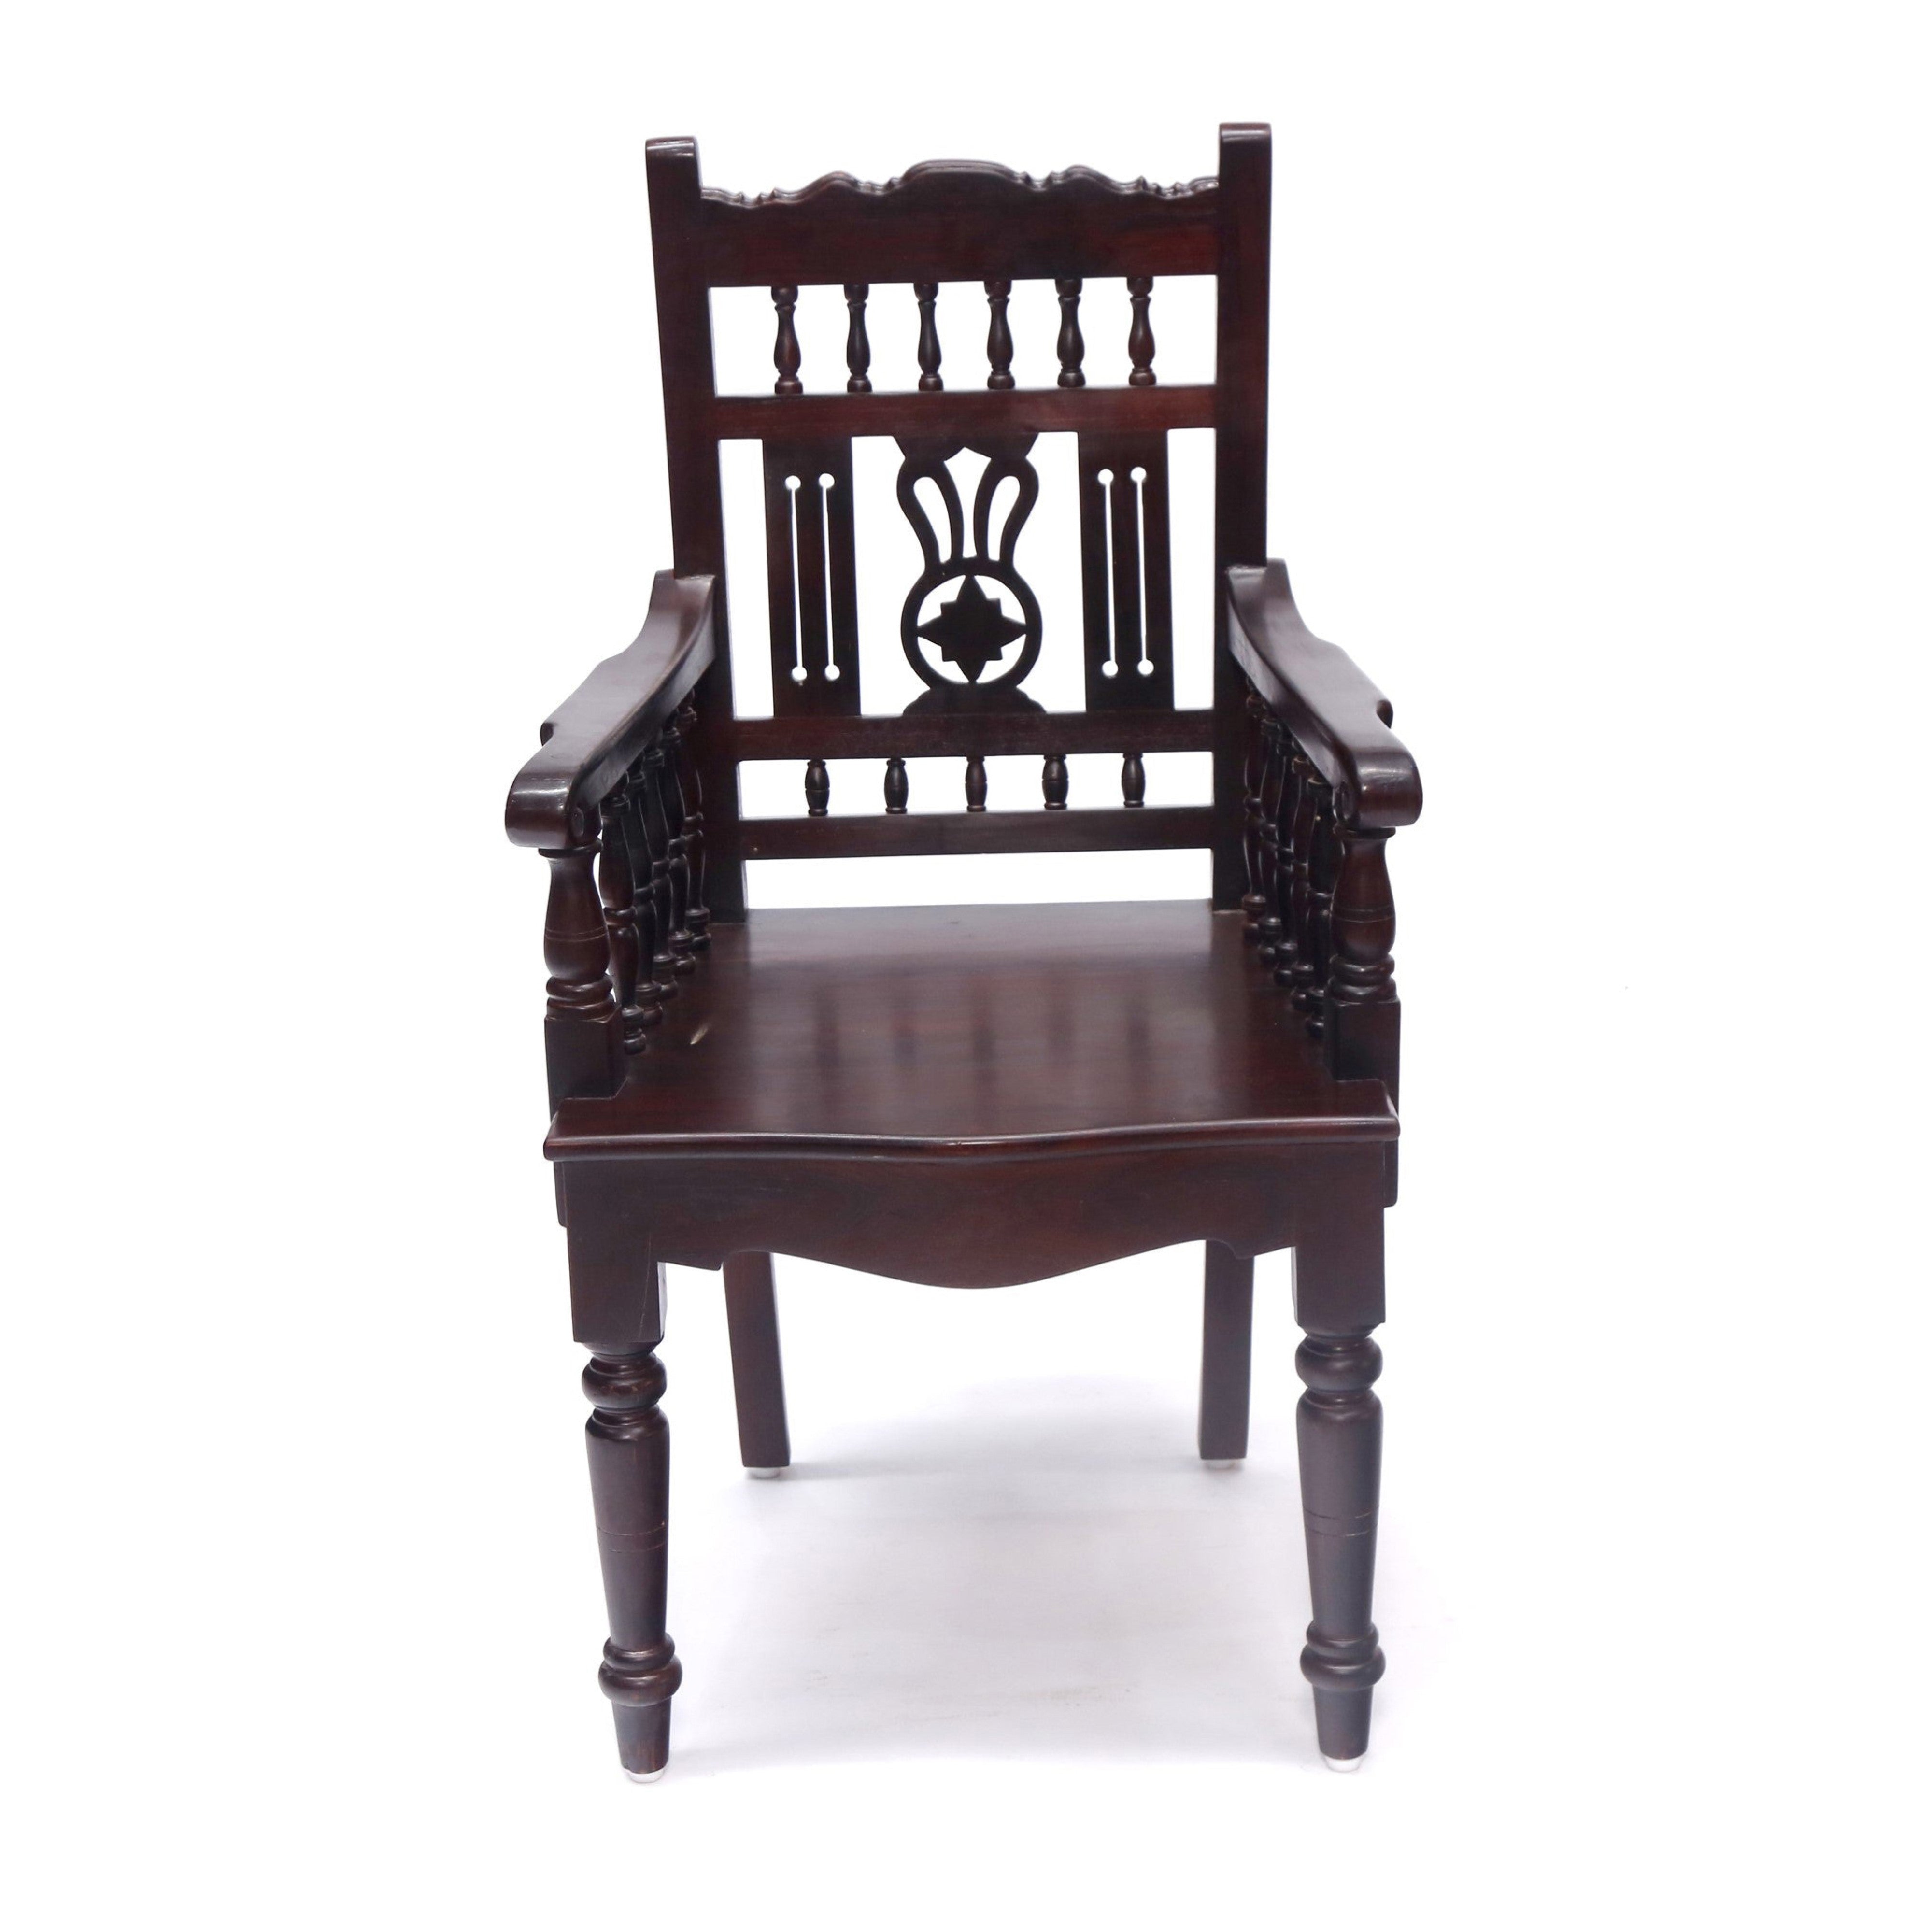 Mahogany Tone Intricate Royal Carved Chair Arm Chair